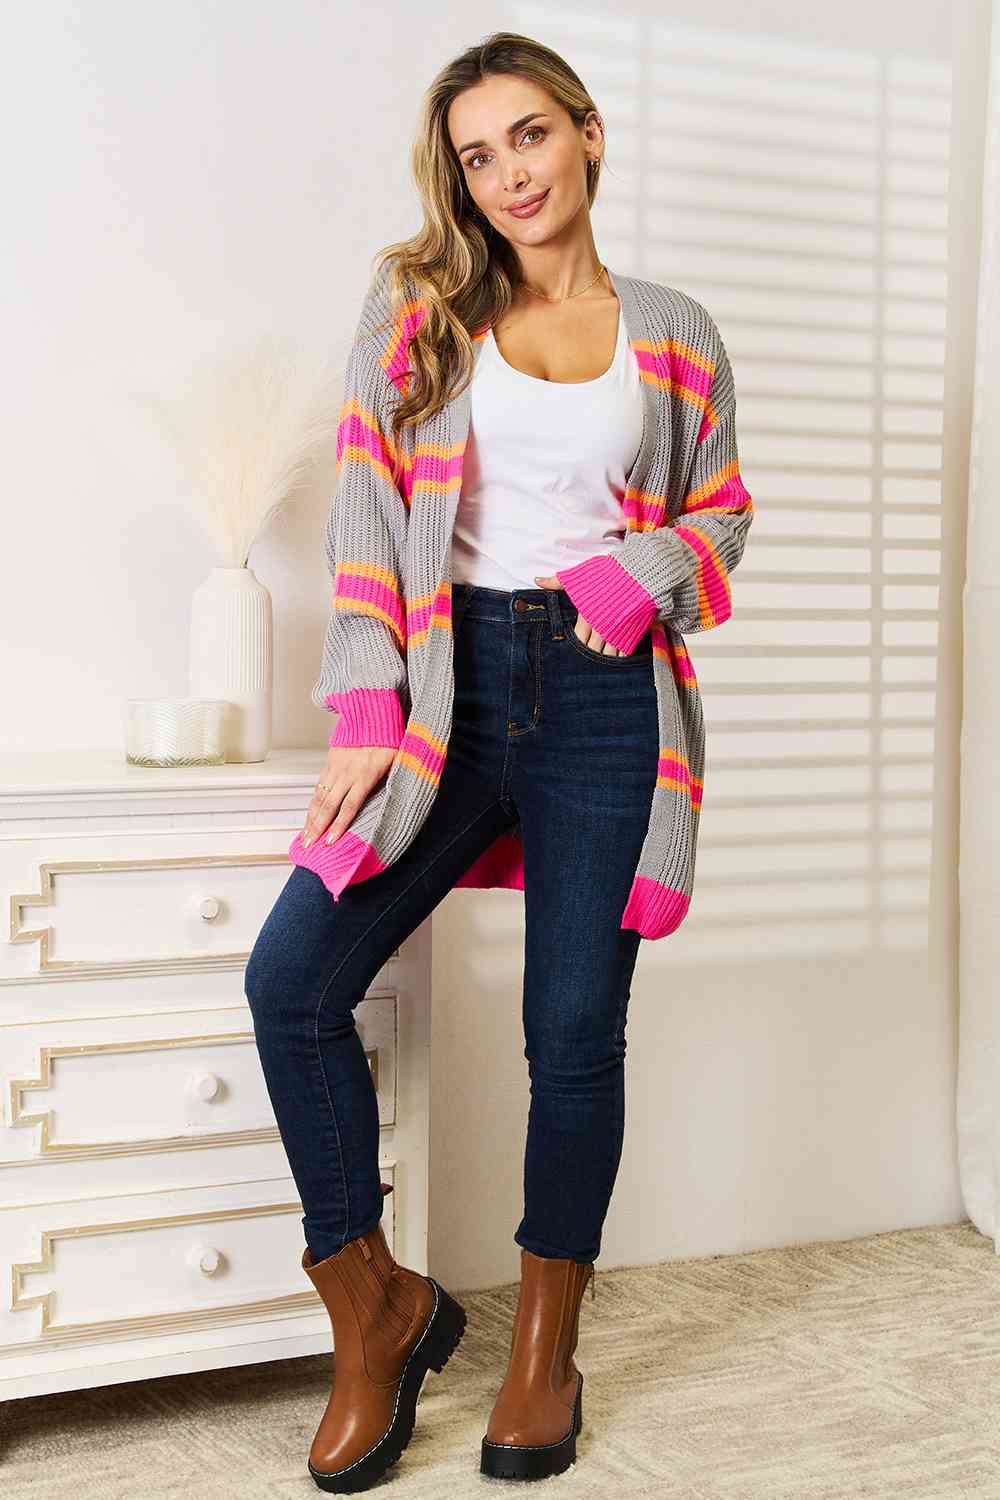 Ribbed Long Sleeve Cardigan - Women’s Clothing & Accessories - Shirts & Tops - 5 - 2024